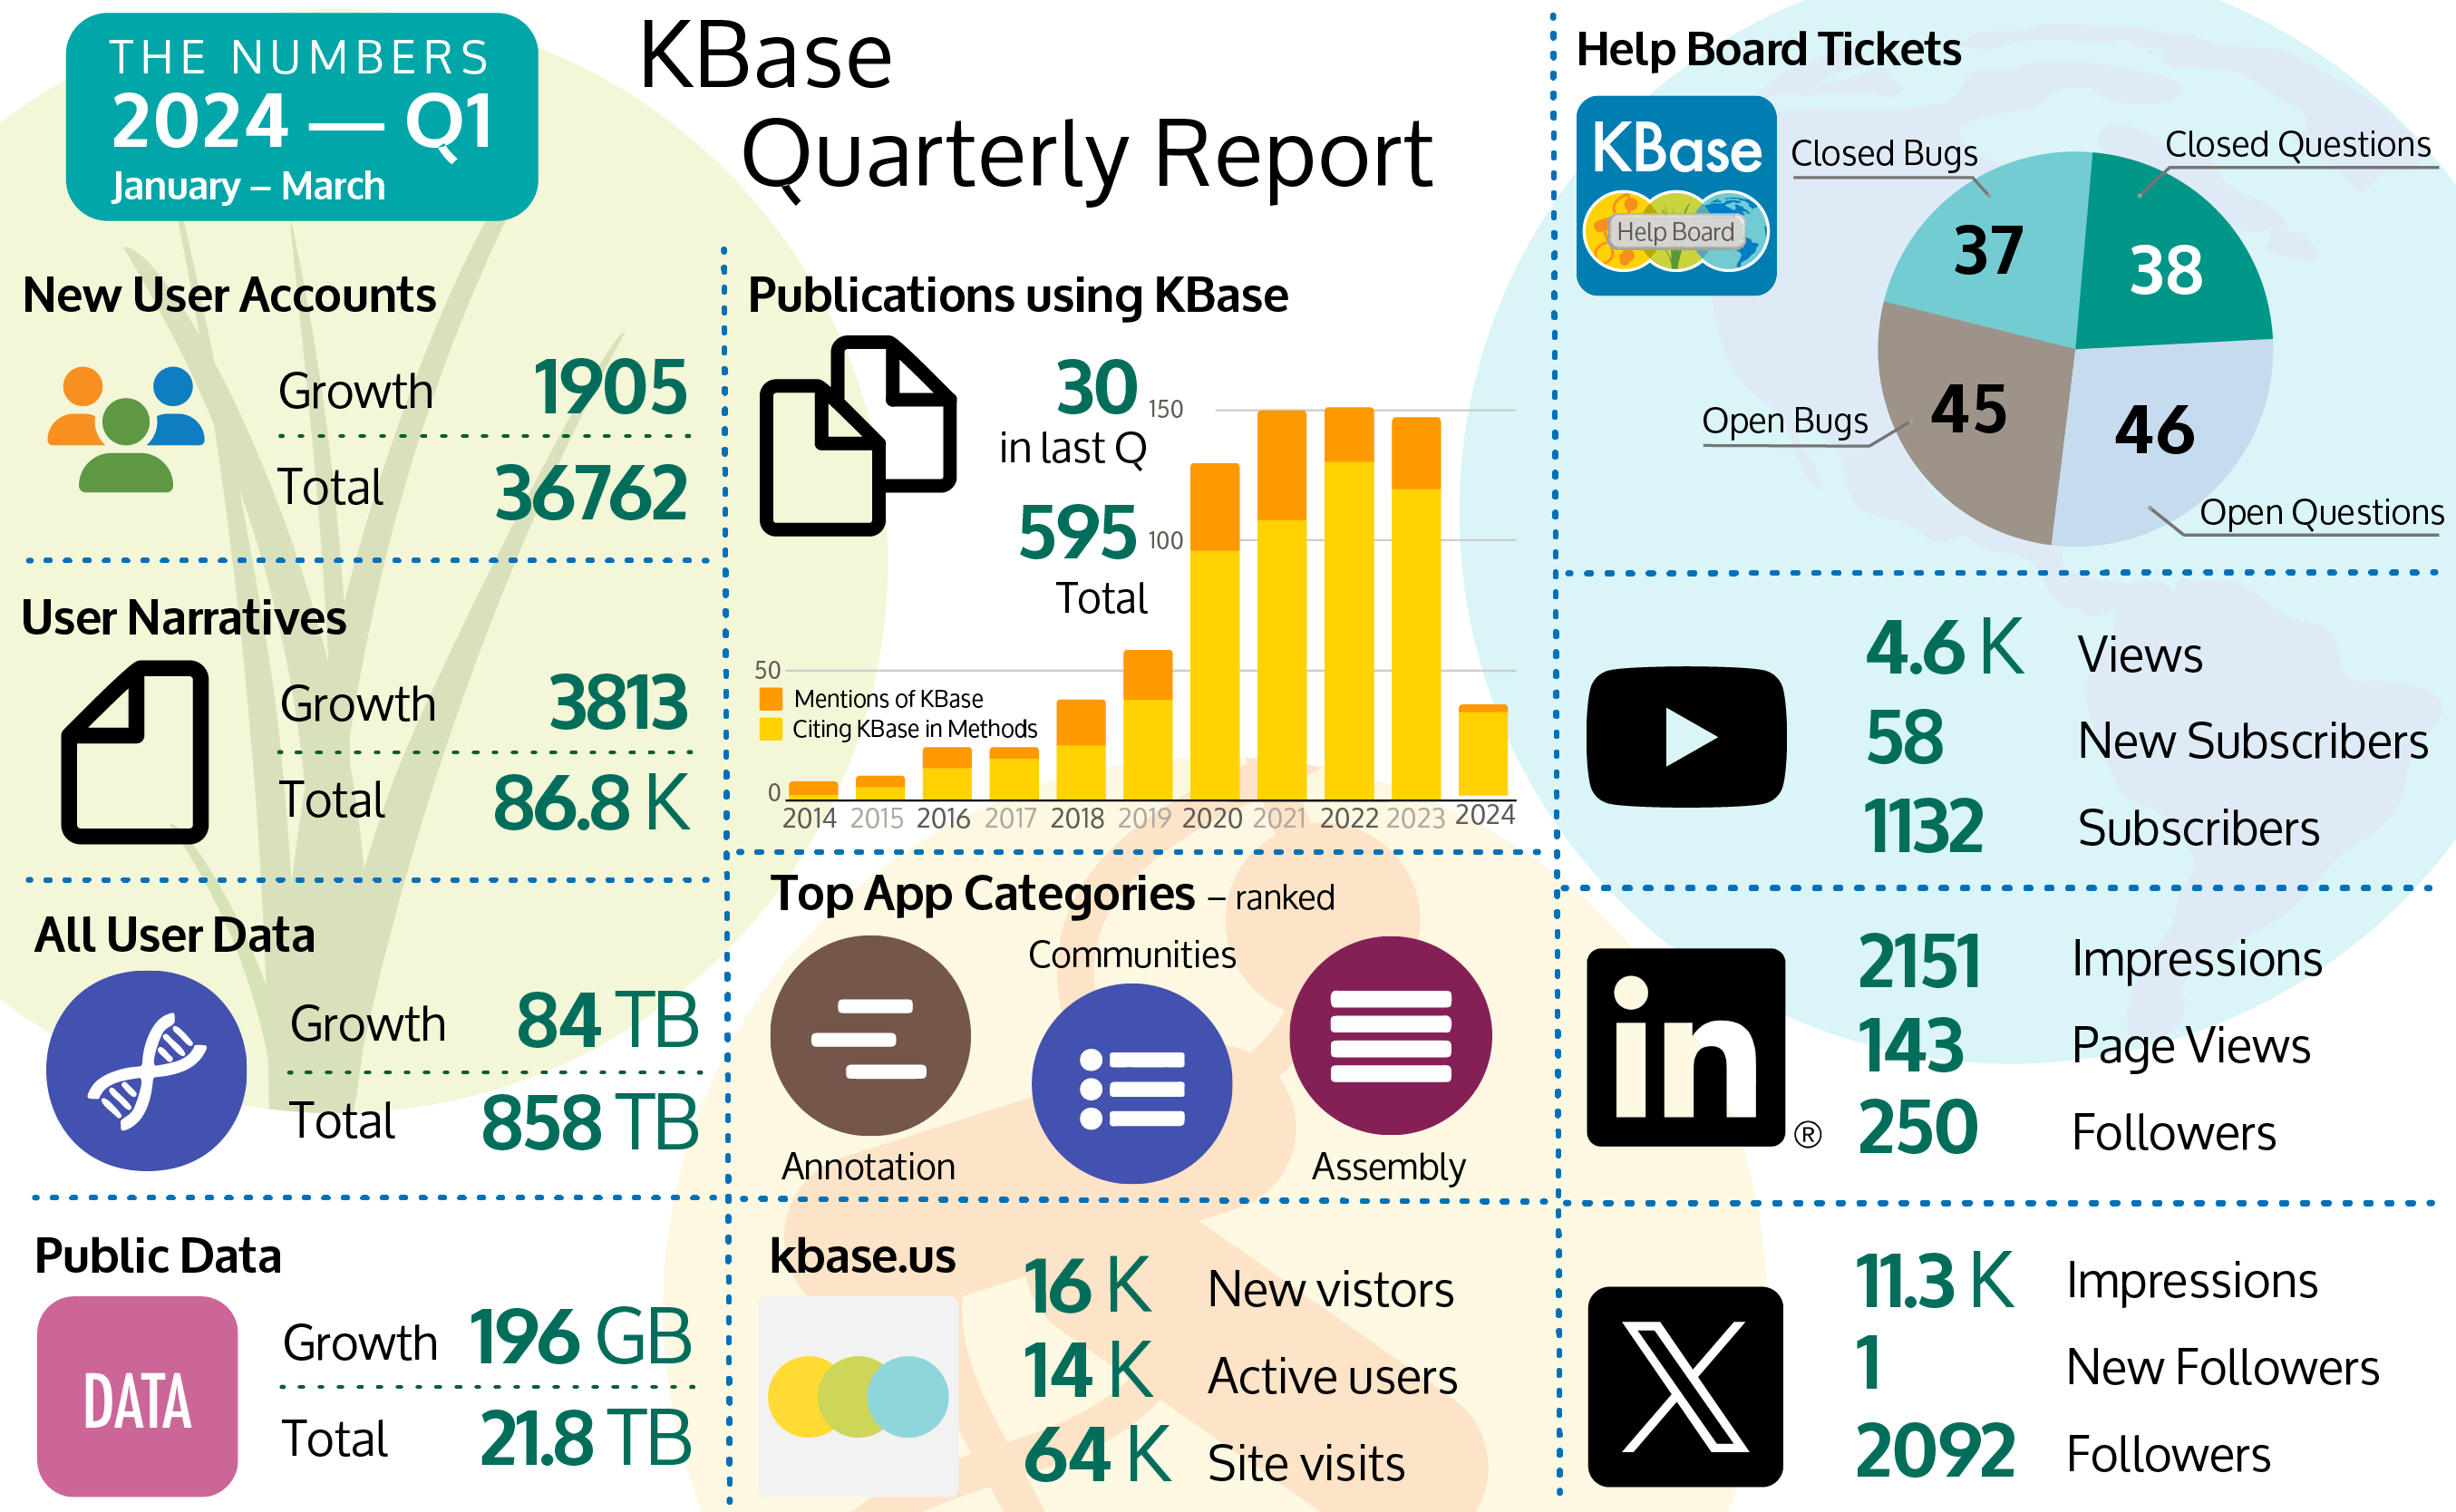 The graphic provides the following statistics for KBase from January to March 2024. There were 1905 new user accounts added to the platform for a total of 36762 accounts. The total number of Narratives is 86,800 with 3813 new Narratives. User data grew by 84 terabytes for a total of 858 terabytes. Publicly available data grew by 196 GB to 21.8 TB. New publications cited using KBase came in at 30 for a total of 595 publications since 2014. Top App categories were annotation, communities, and assembly. Help Board Tickets had 166 total, including 38 Closed Questions, 46 Open Questions, 45 Open Bugs and 37 Closed Bugs that fill out a pie chart. X had 11,300 Impressions, 1 new follower and 2092 total followers. LinkedIn had 2151 Impressions, 143 Page Views, and 250 Followers. YouTube had 1 new video post, along with 4,600 views, 58 new subscribers for a total of 1132 subscribers; the kbase.us site had 16,000 new visitors, 14,000 active users and 61,000 visits to the site. 